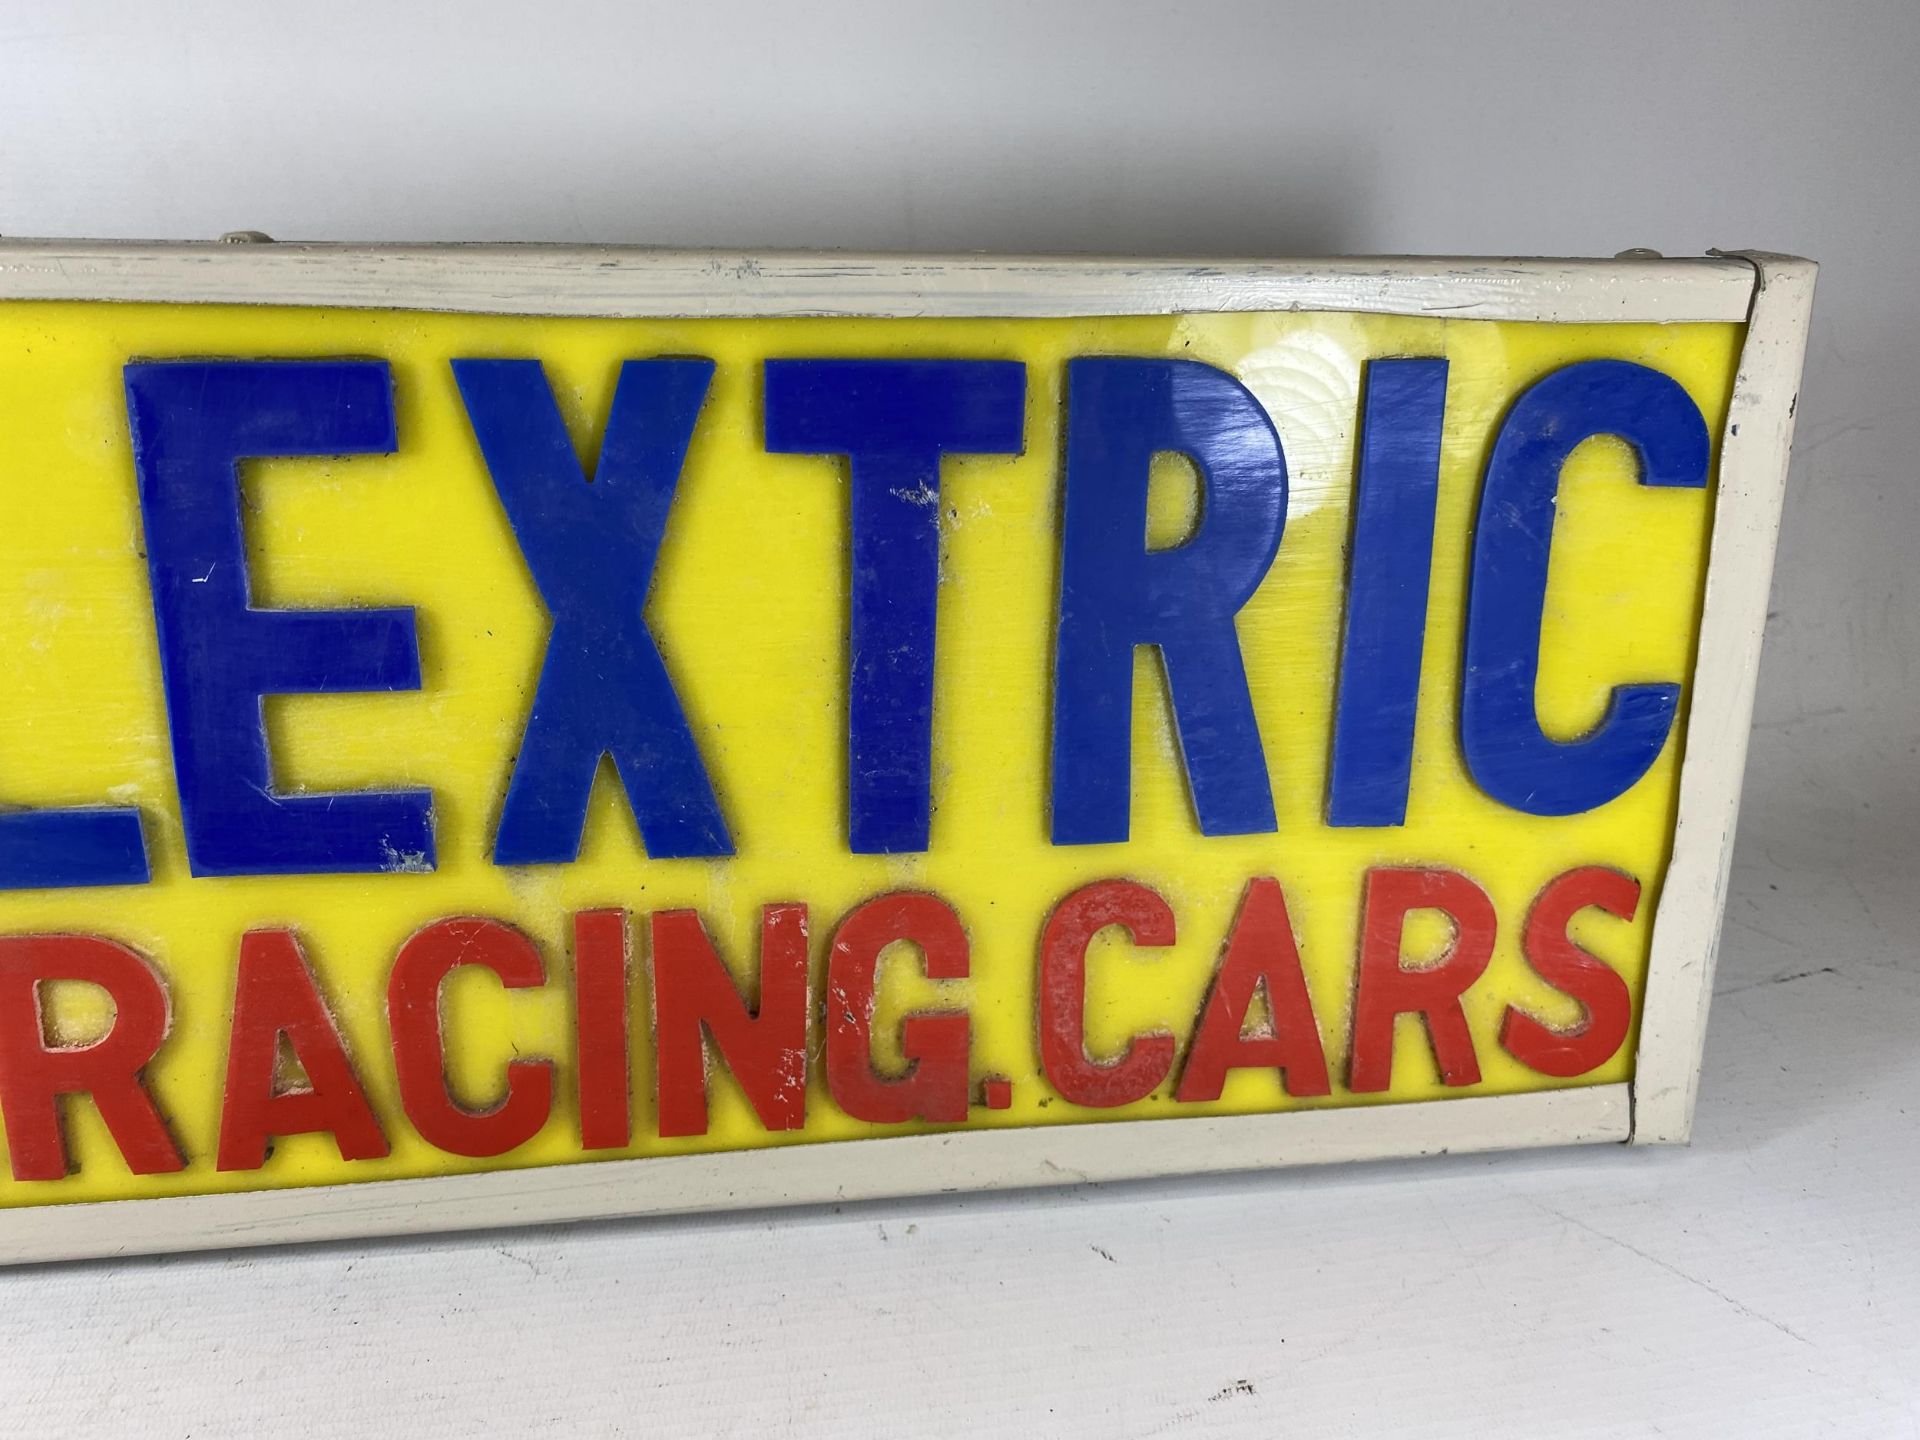 A SCALEXTRIC MODEL RACING CARS ILLUMINATED BOX SIGN, 22.5 X 63.5CM - Image 3 of 5